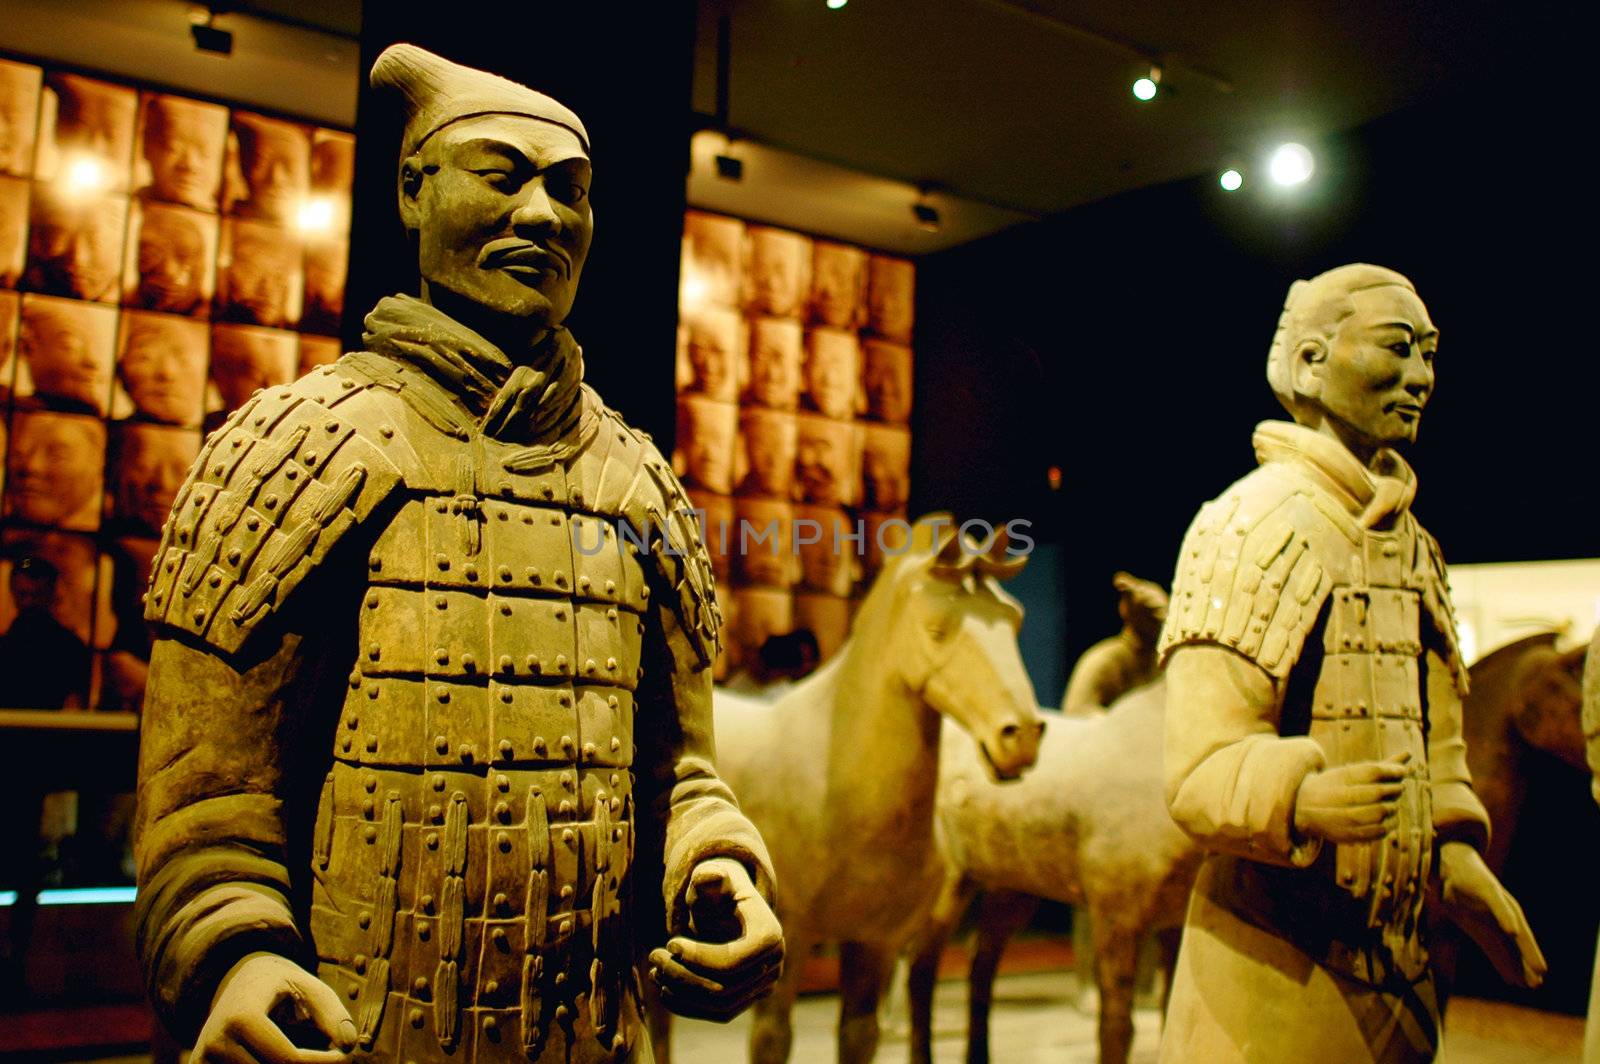 Terracotta warriors and horses by bbbar